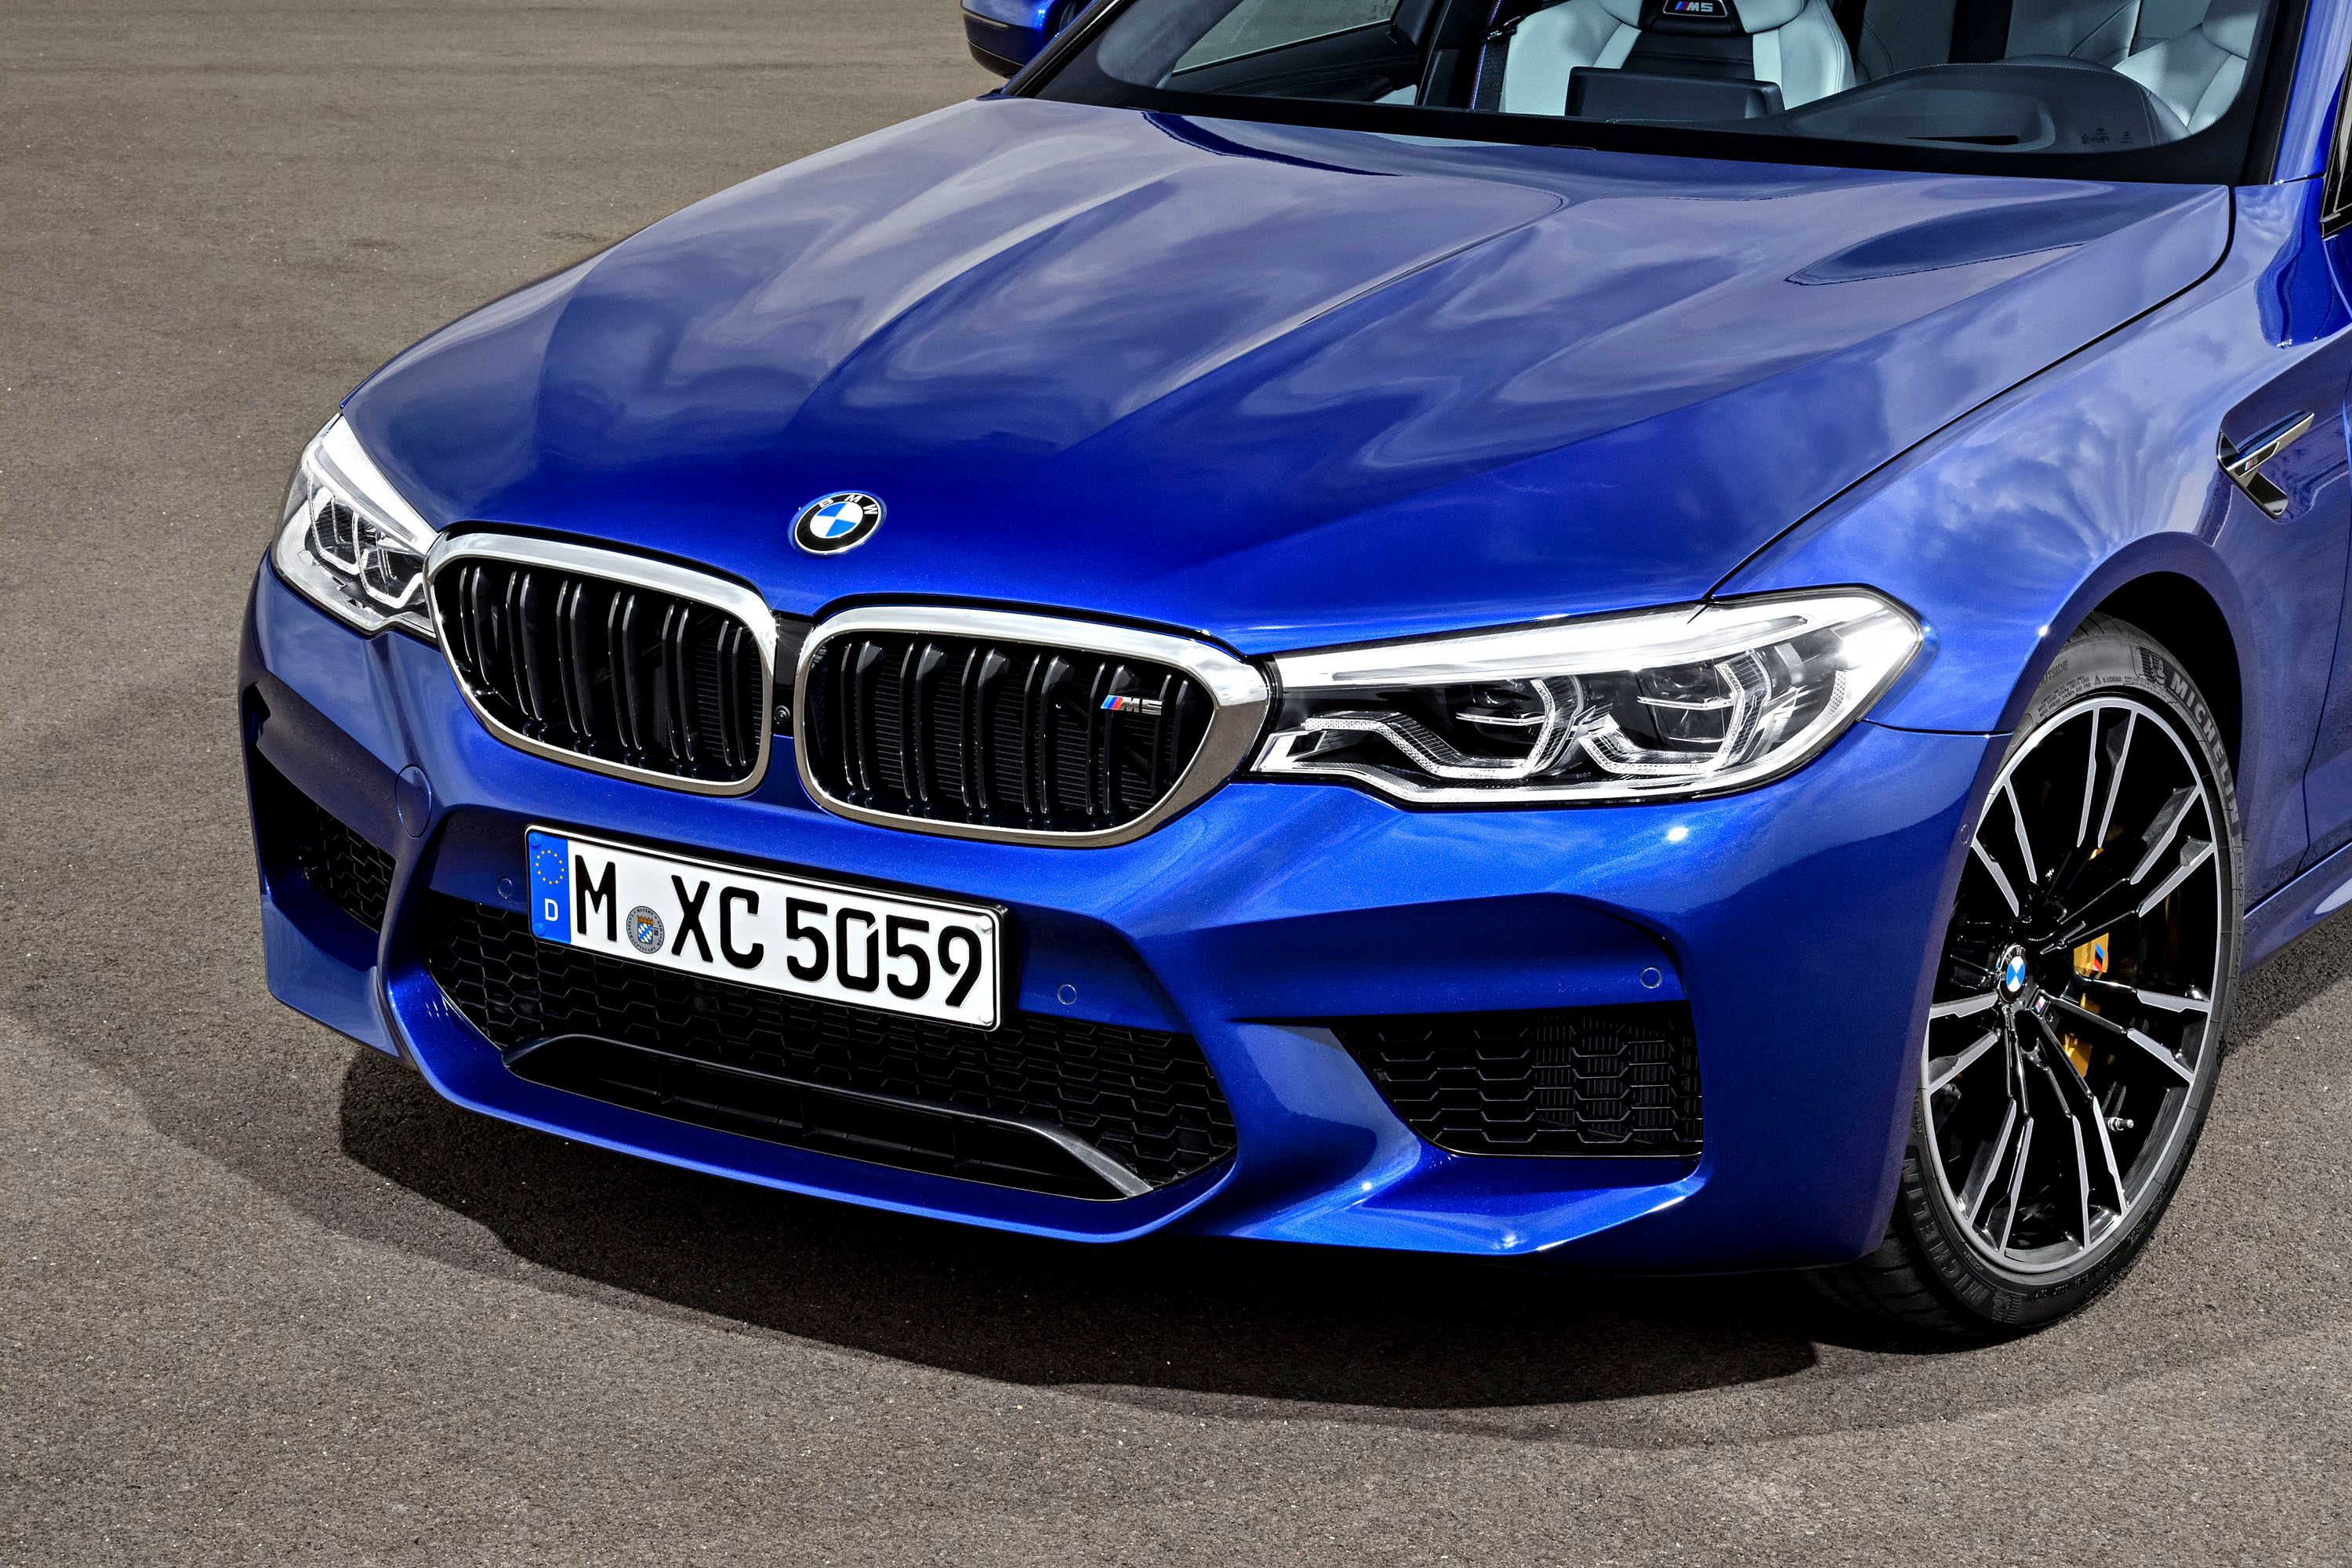 One more look at the new M5 Facia. Nice!